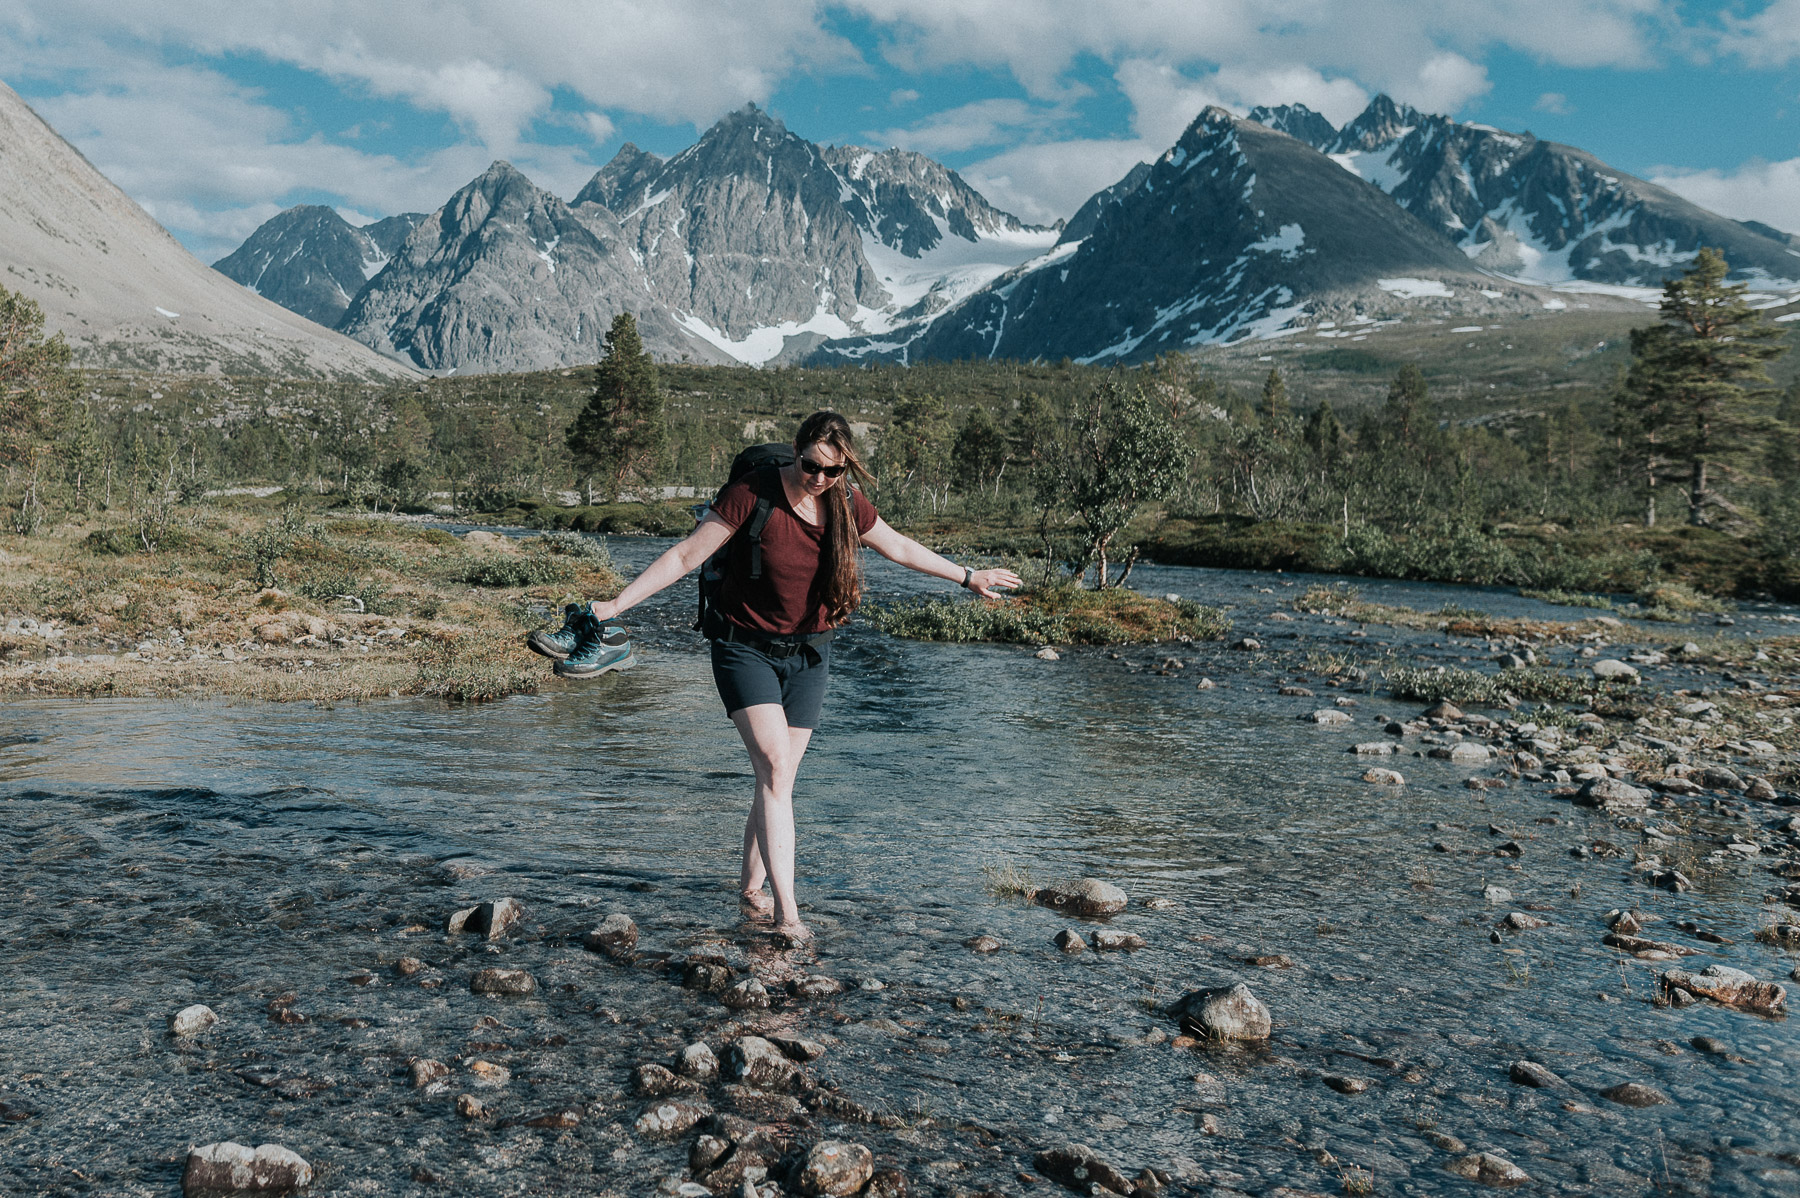 Adventure photographer Tanja Skoglund walks through the river barefoot with a stunning view of Lyngen Alps in Troms Norway